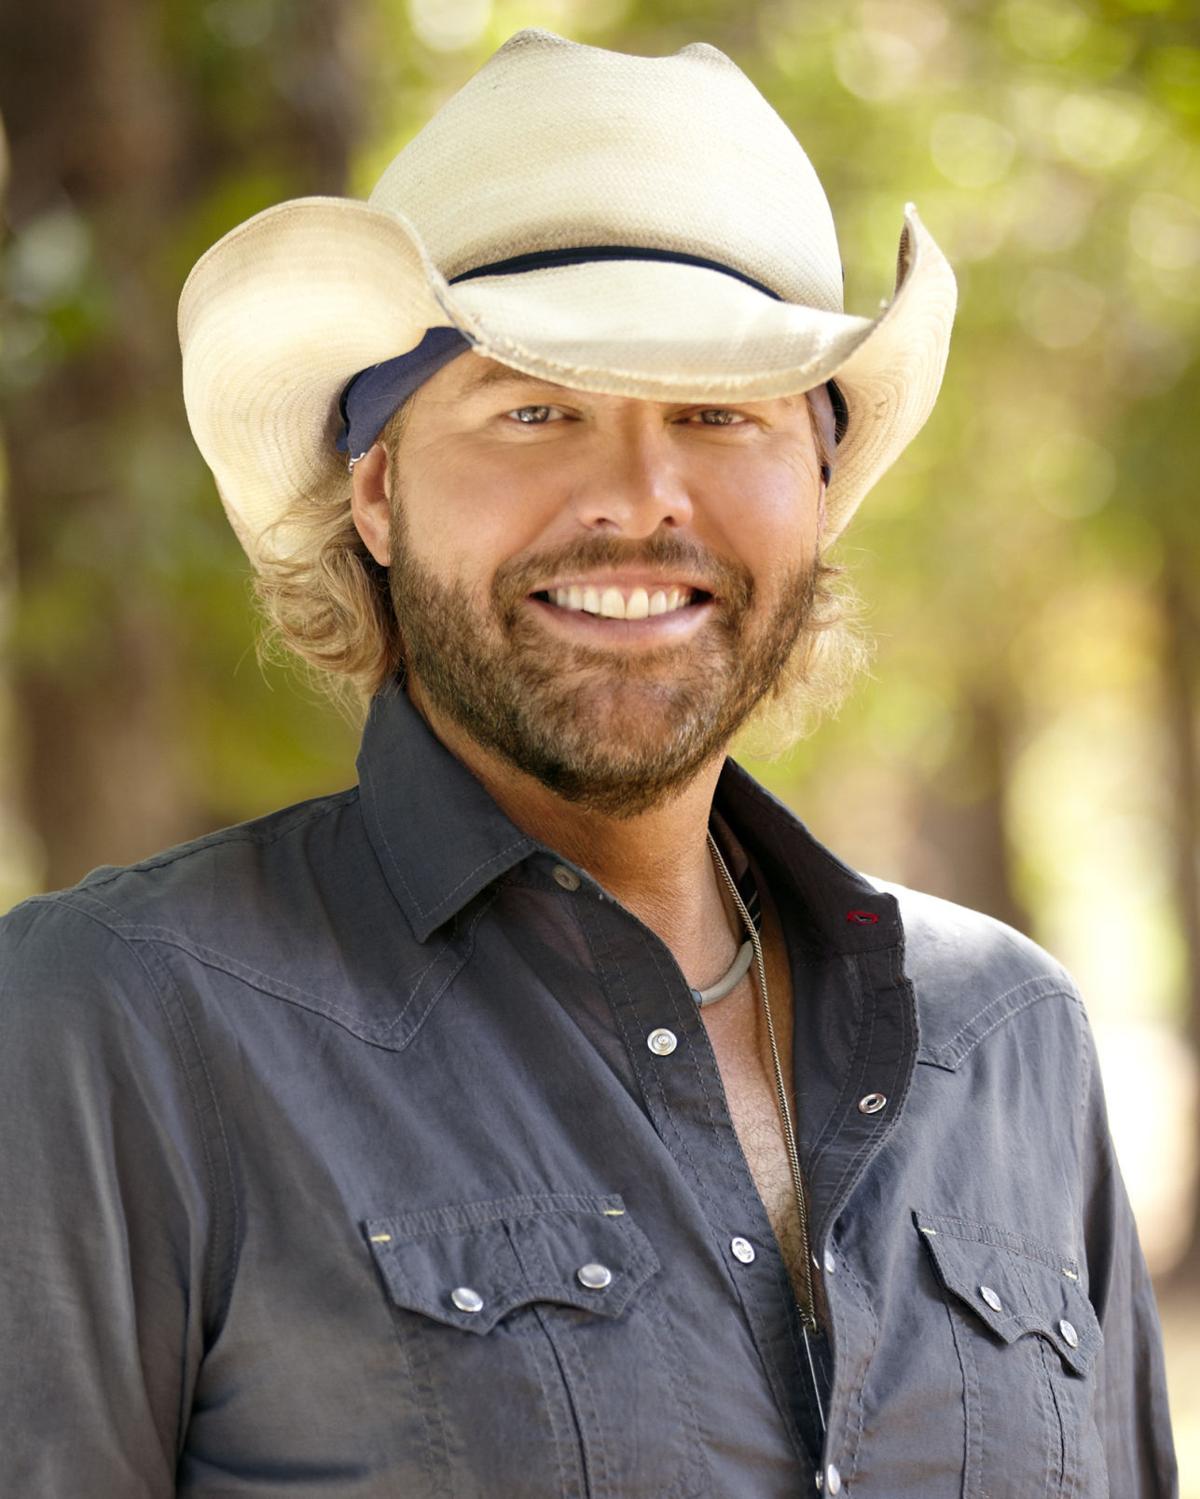 Toby Keith joins Carrie Underwood as 2016 headliners